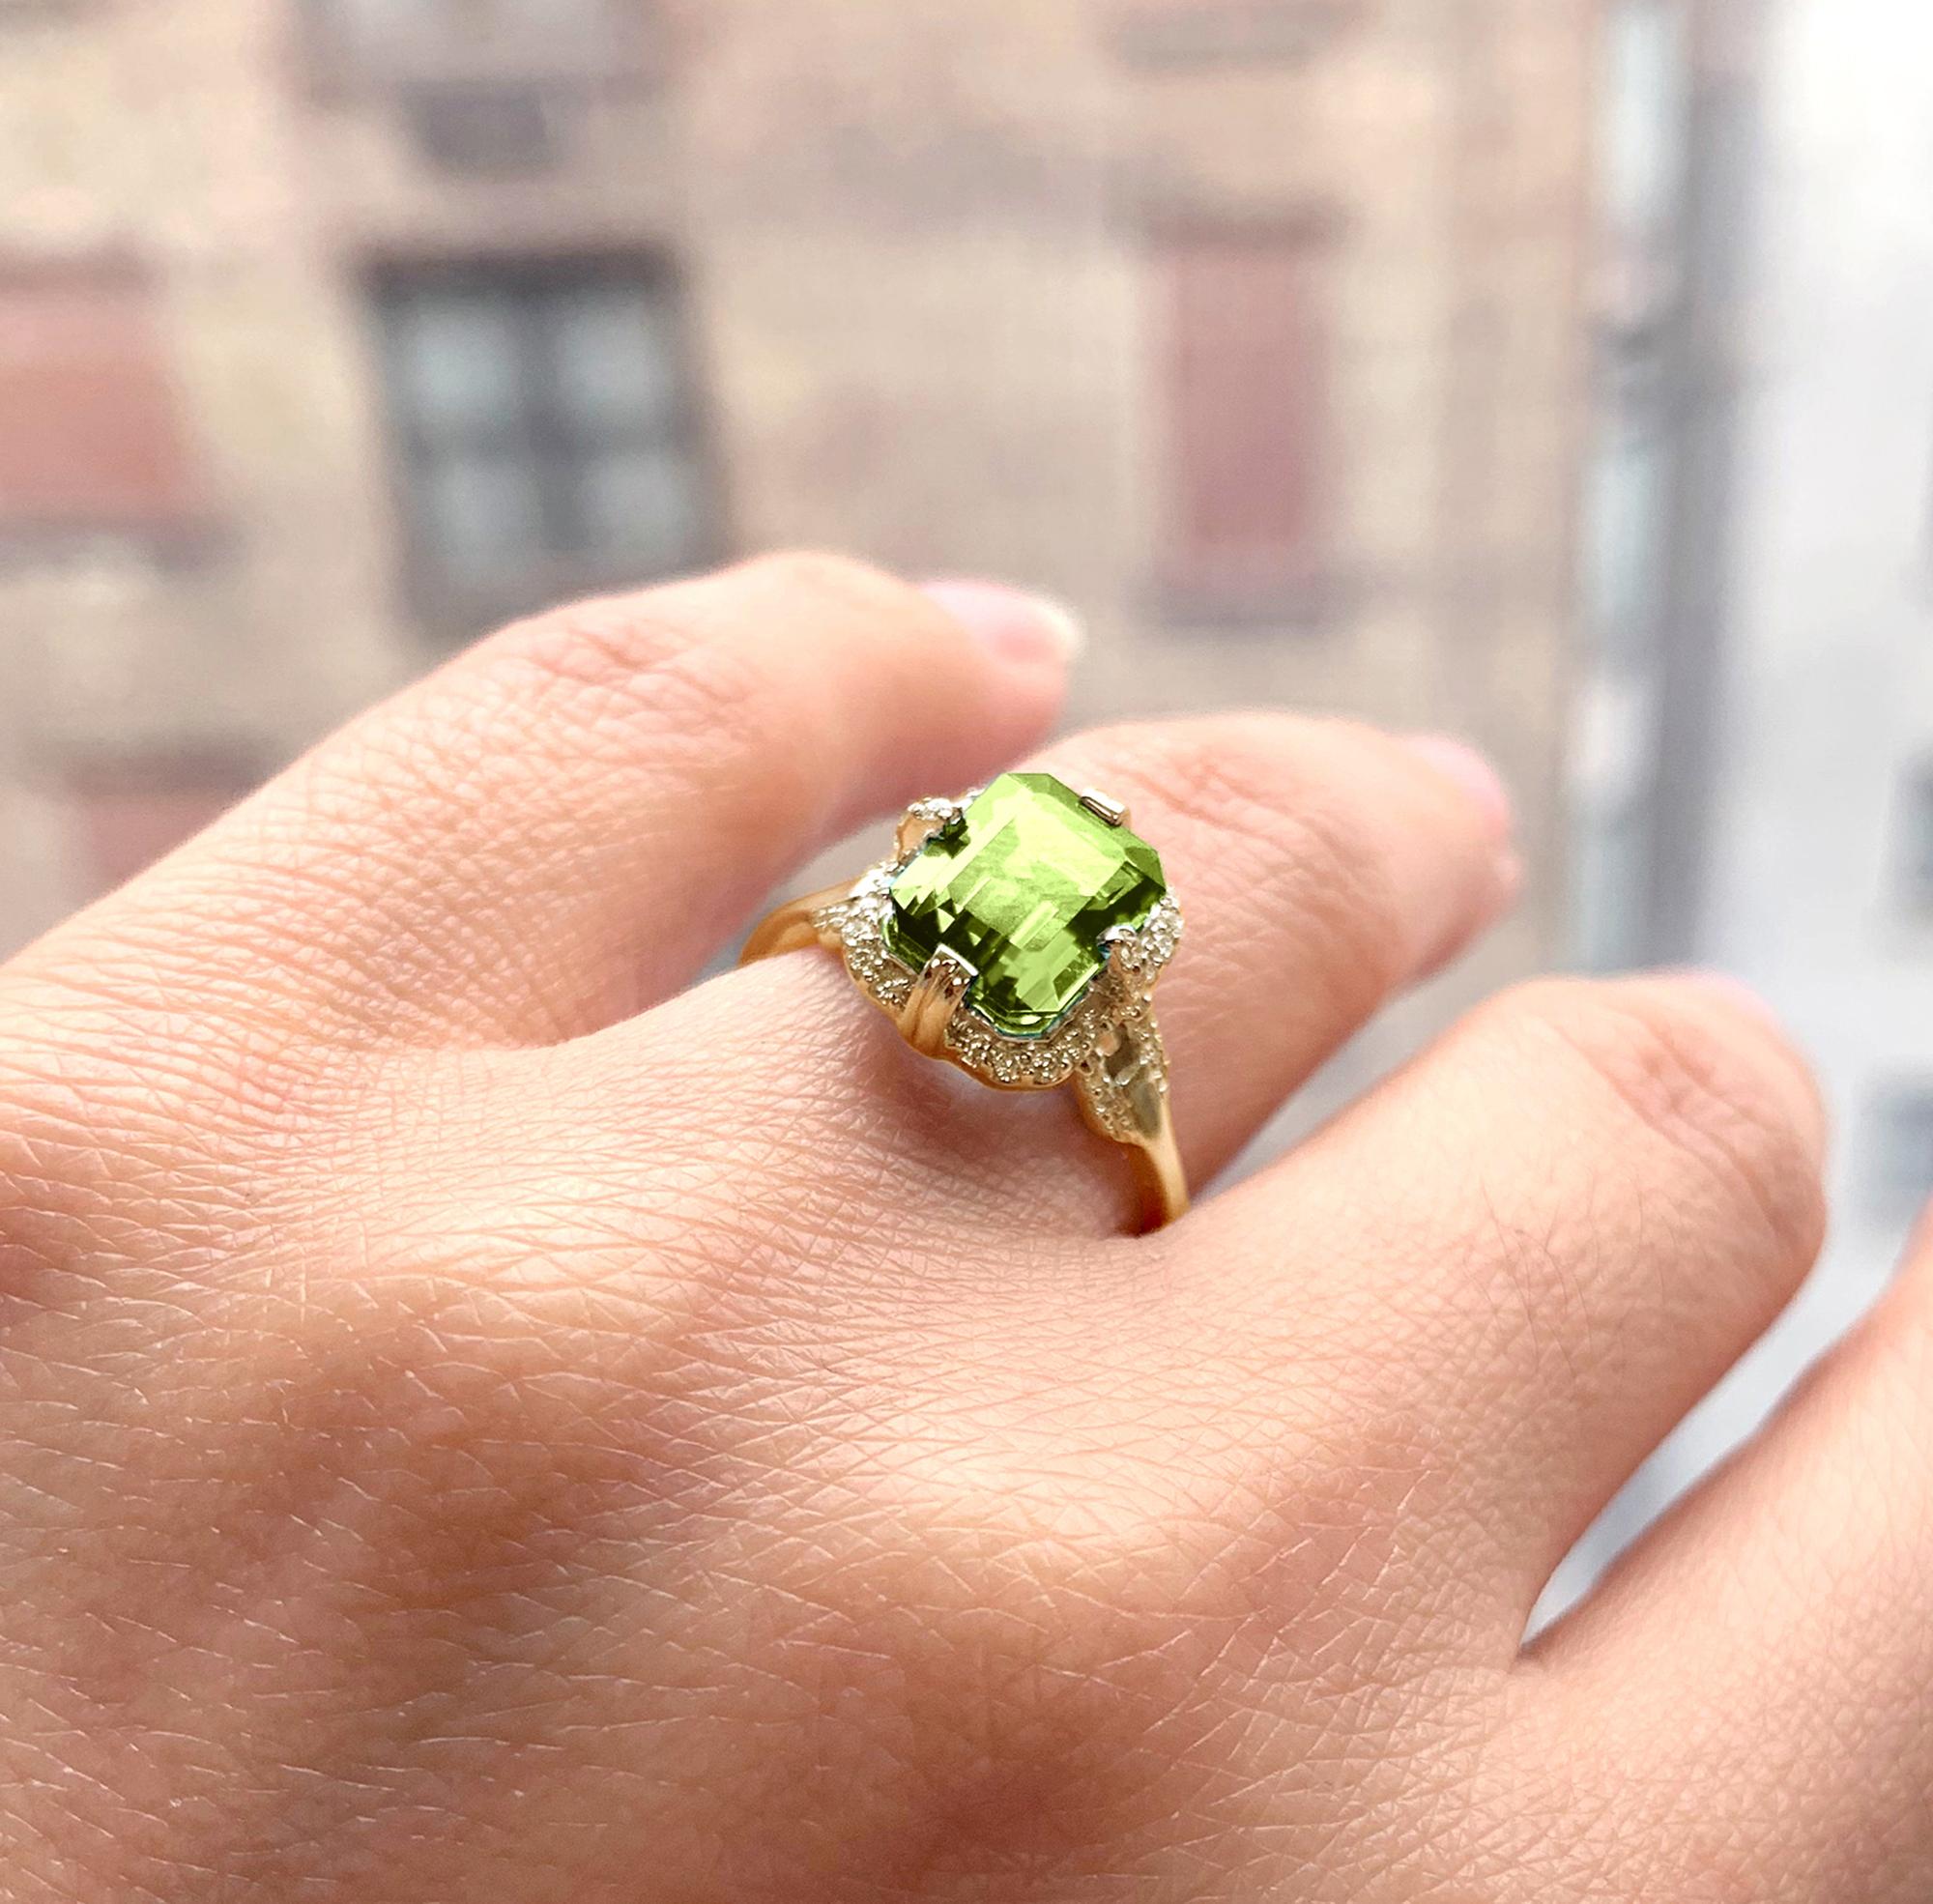 Peridot Emerald Cut Ring in 18K Yellow Gold with Diamonds, from 'Gossip' Collection. Like any good piece of gossip, this collection carries a hint of shock value. They will have everyone in suspense about what Goshwara will do next.

* Gemstone